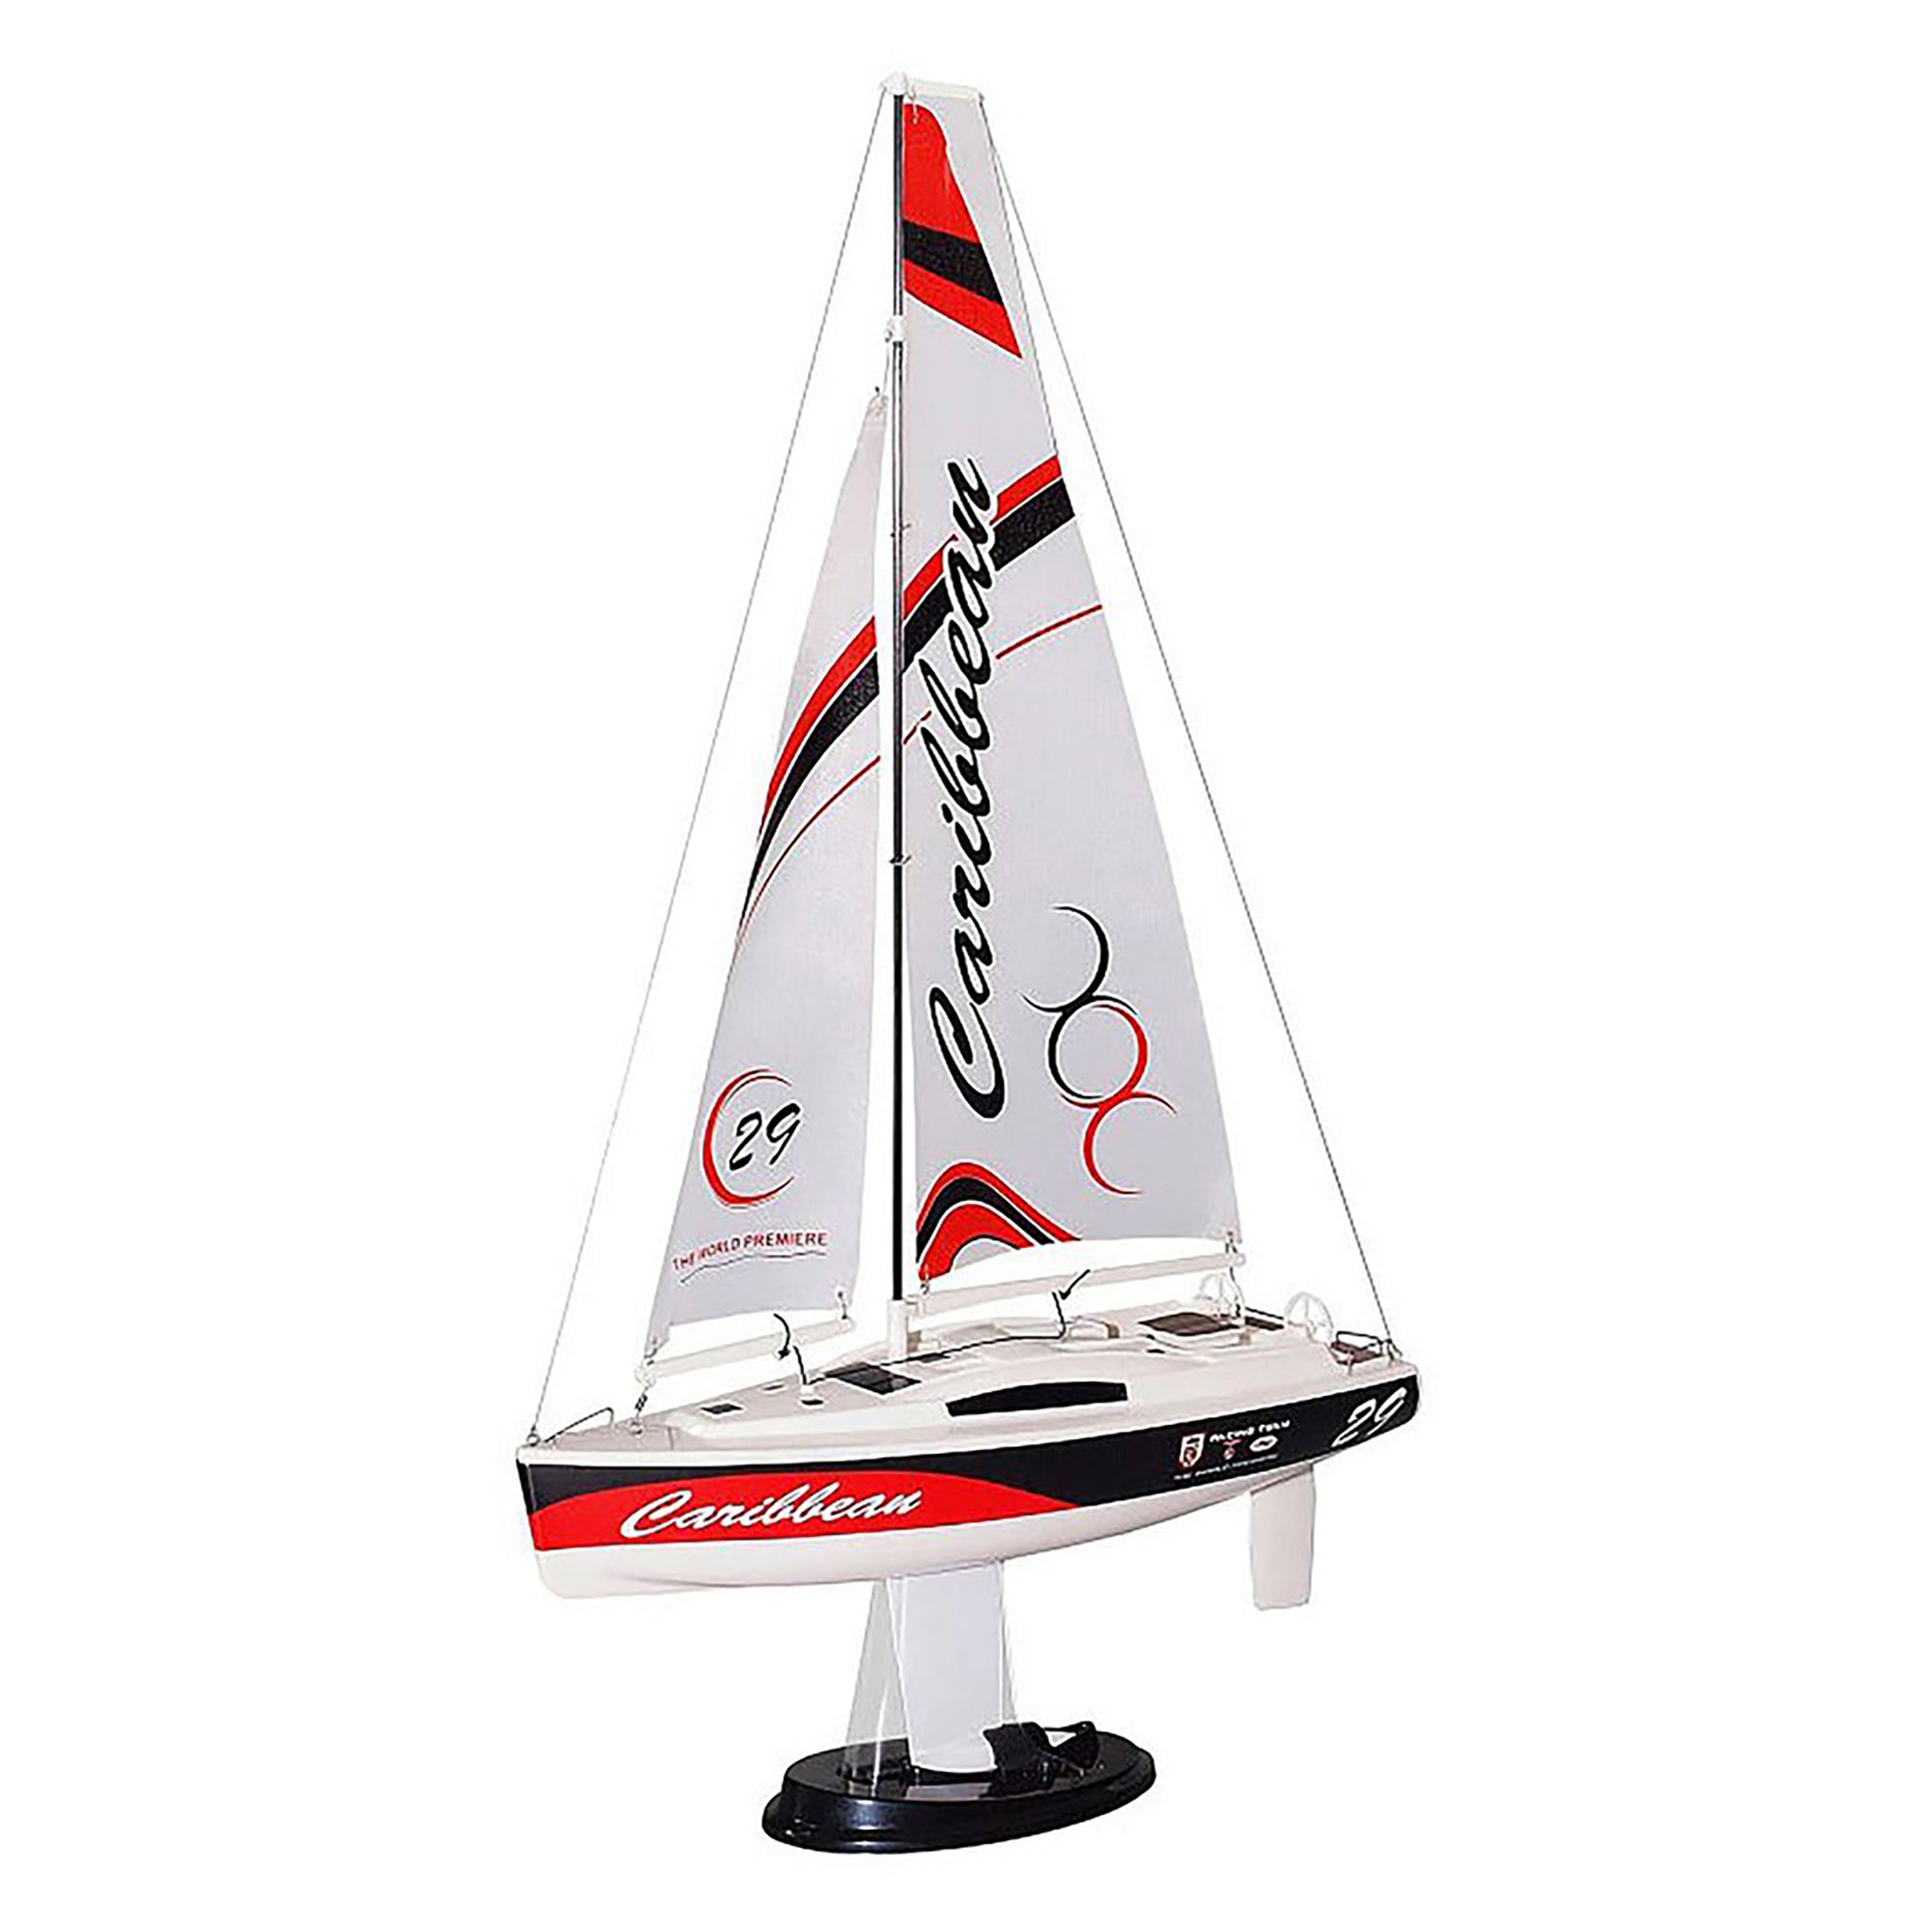 Joysway 8802 Red White Caribbean 2.4Ghz RC Sailboat Yacht (includes Transmitter & Receiver), Multicolour